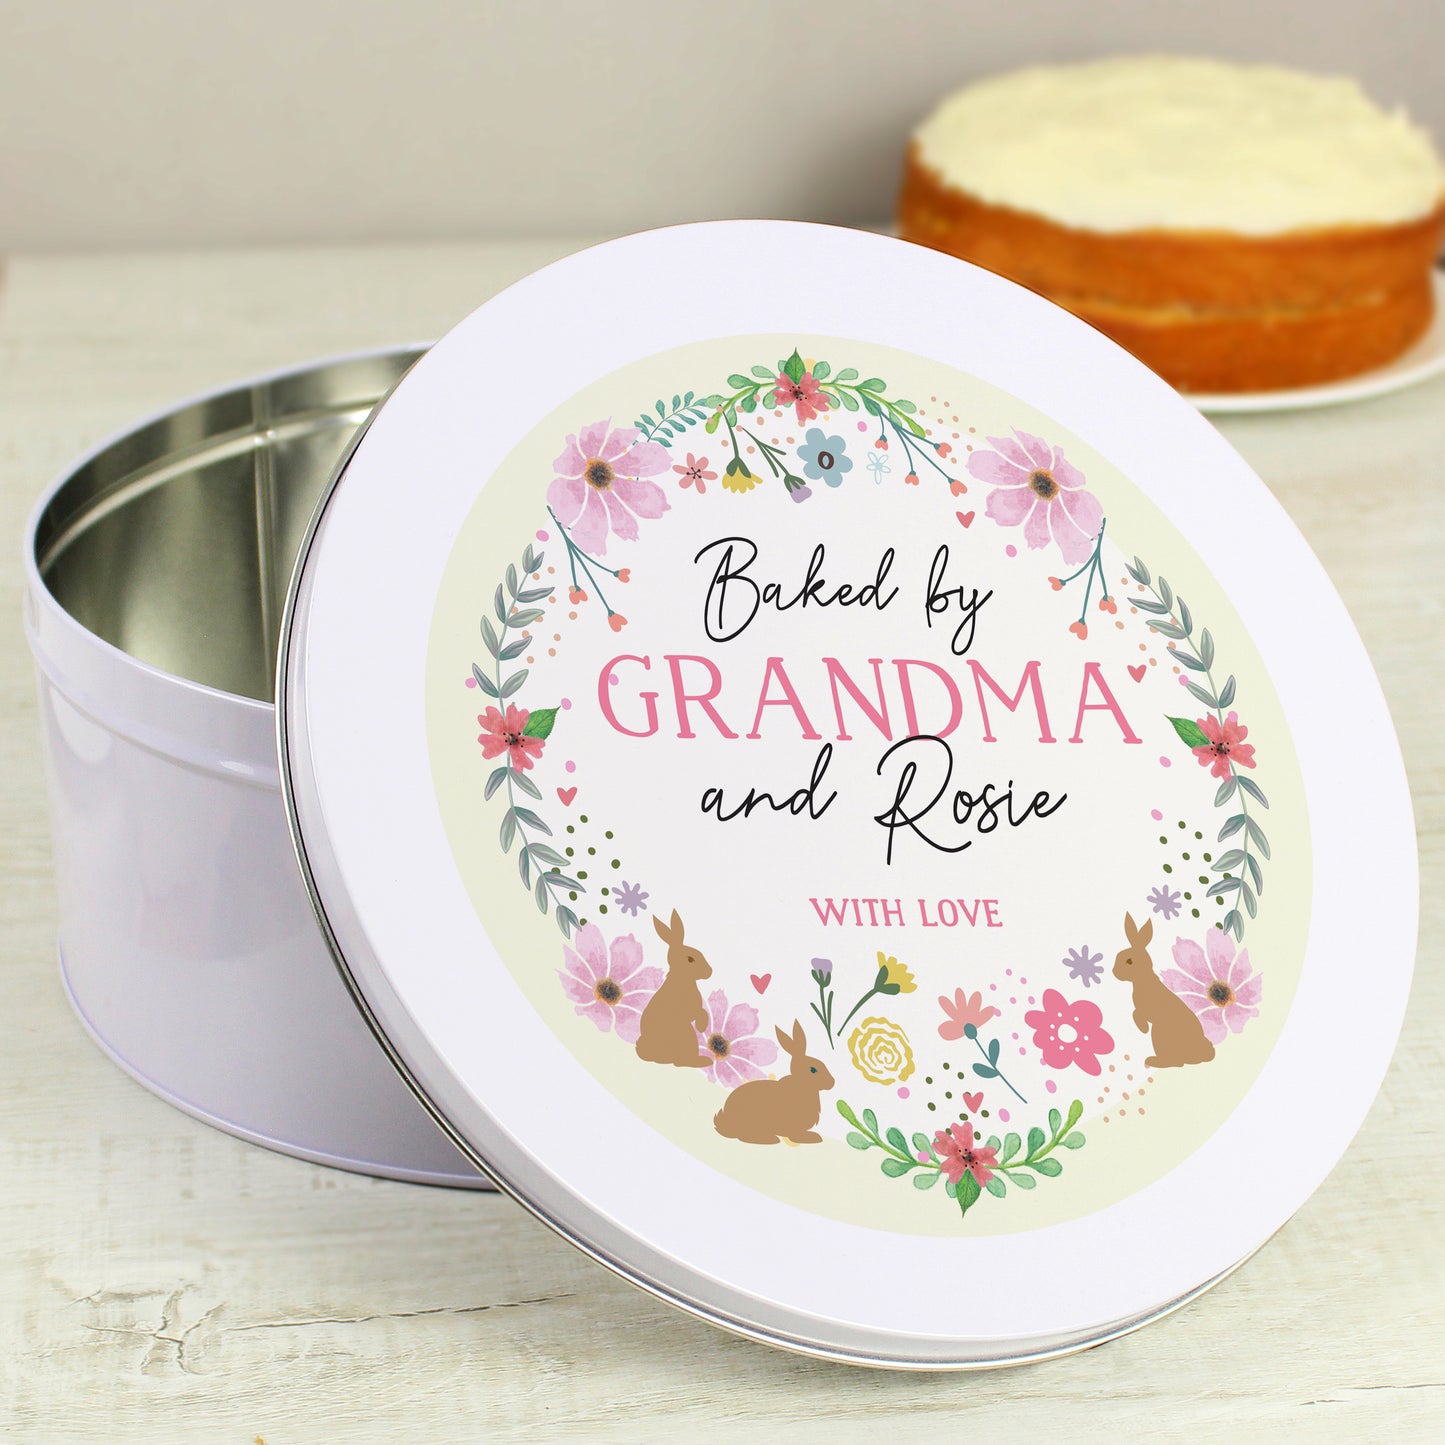 Personalised Floral Cake Tin that says "Baked by GRANDMA and Rosie WITH LOVE"